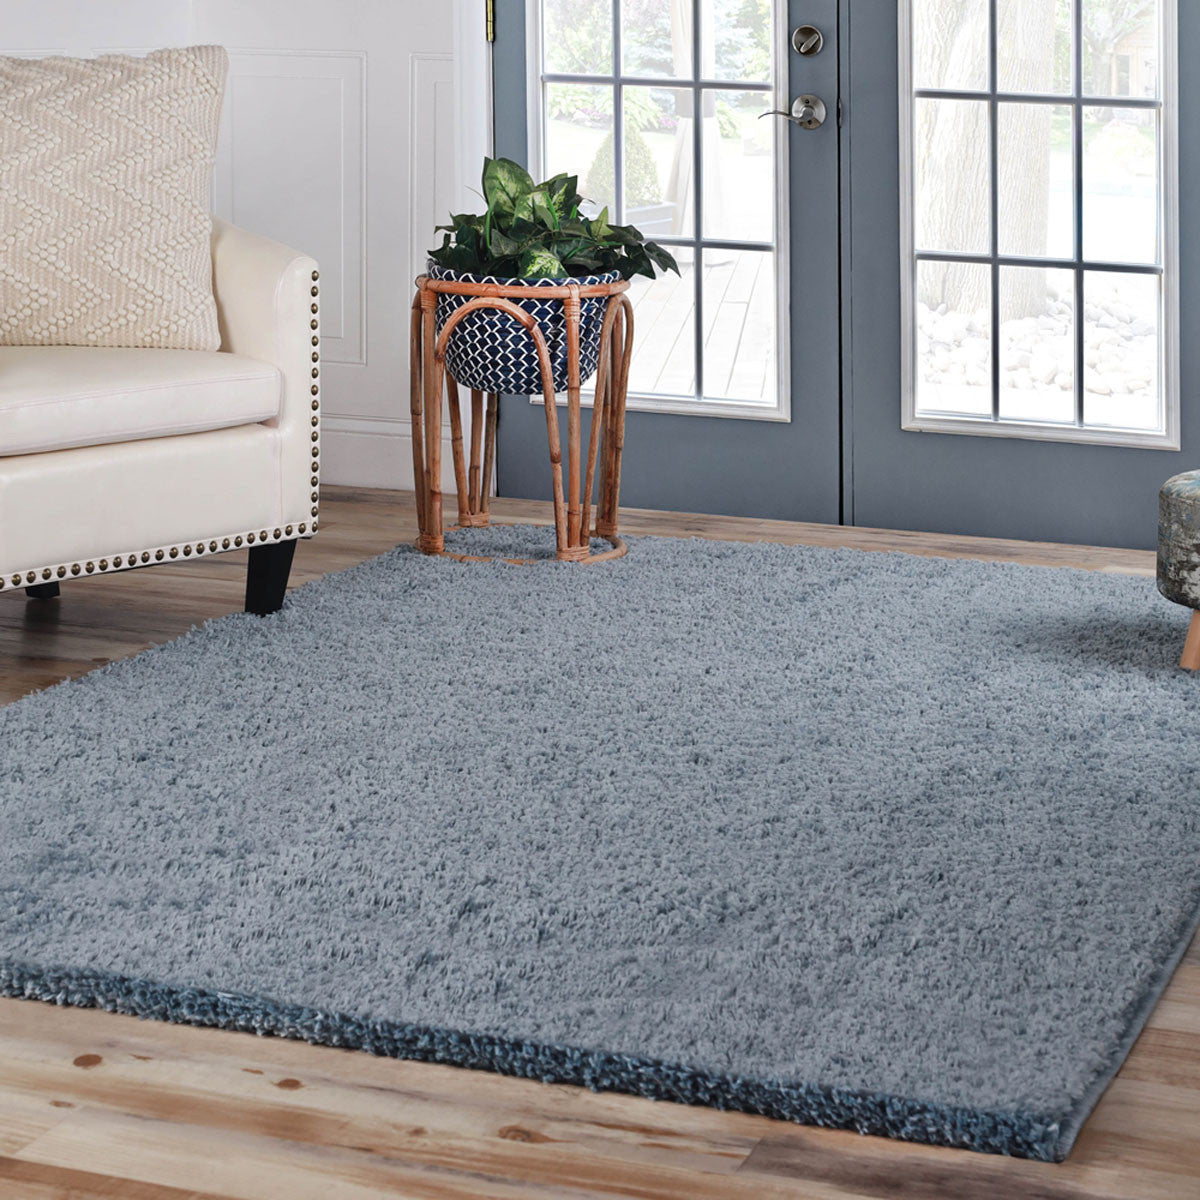 4' X 6' Blue Shag Stain Resistant Area Rug